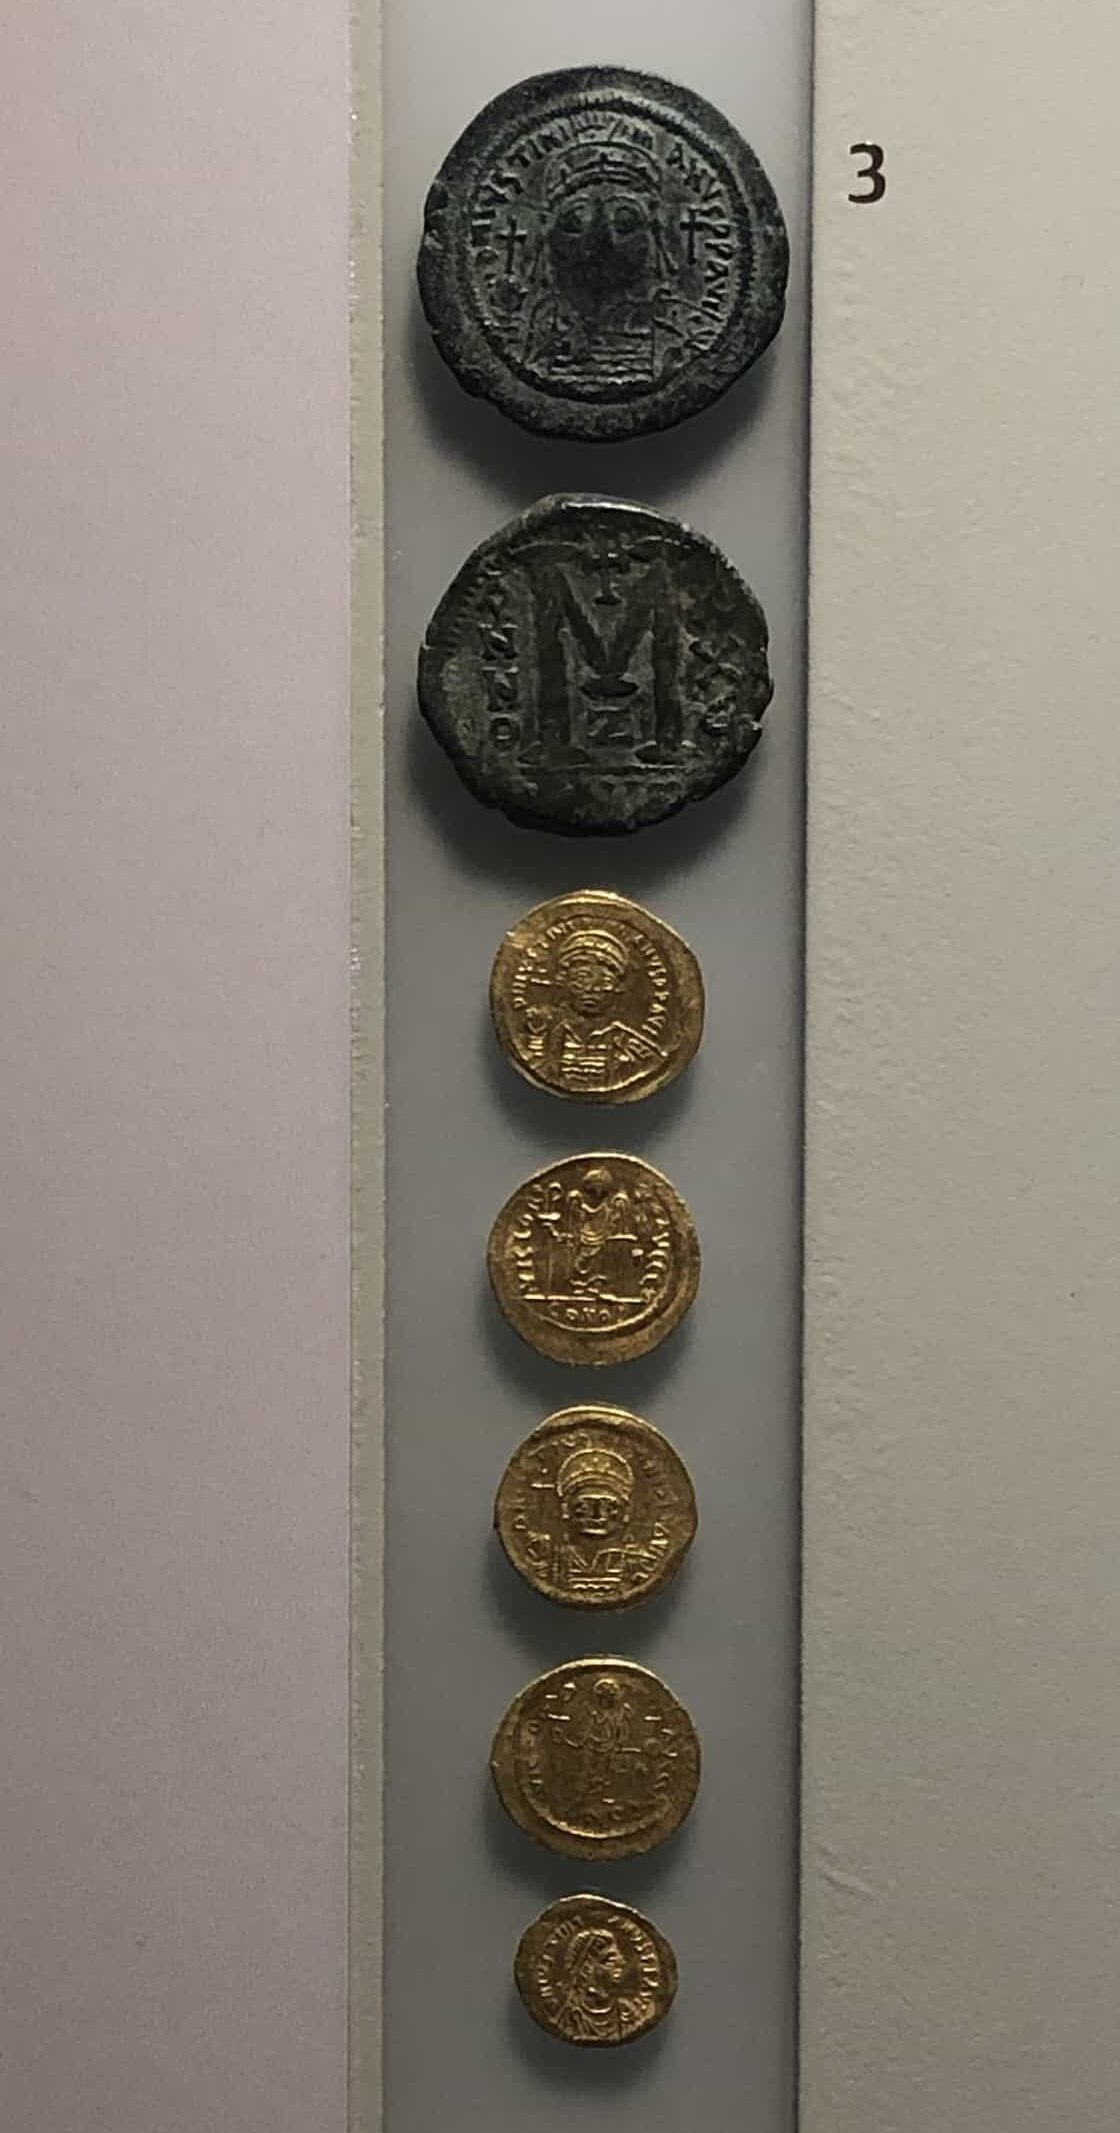 Byzantine coins from the reign of Justinian I